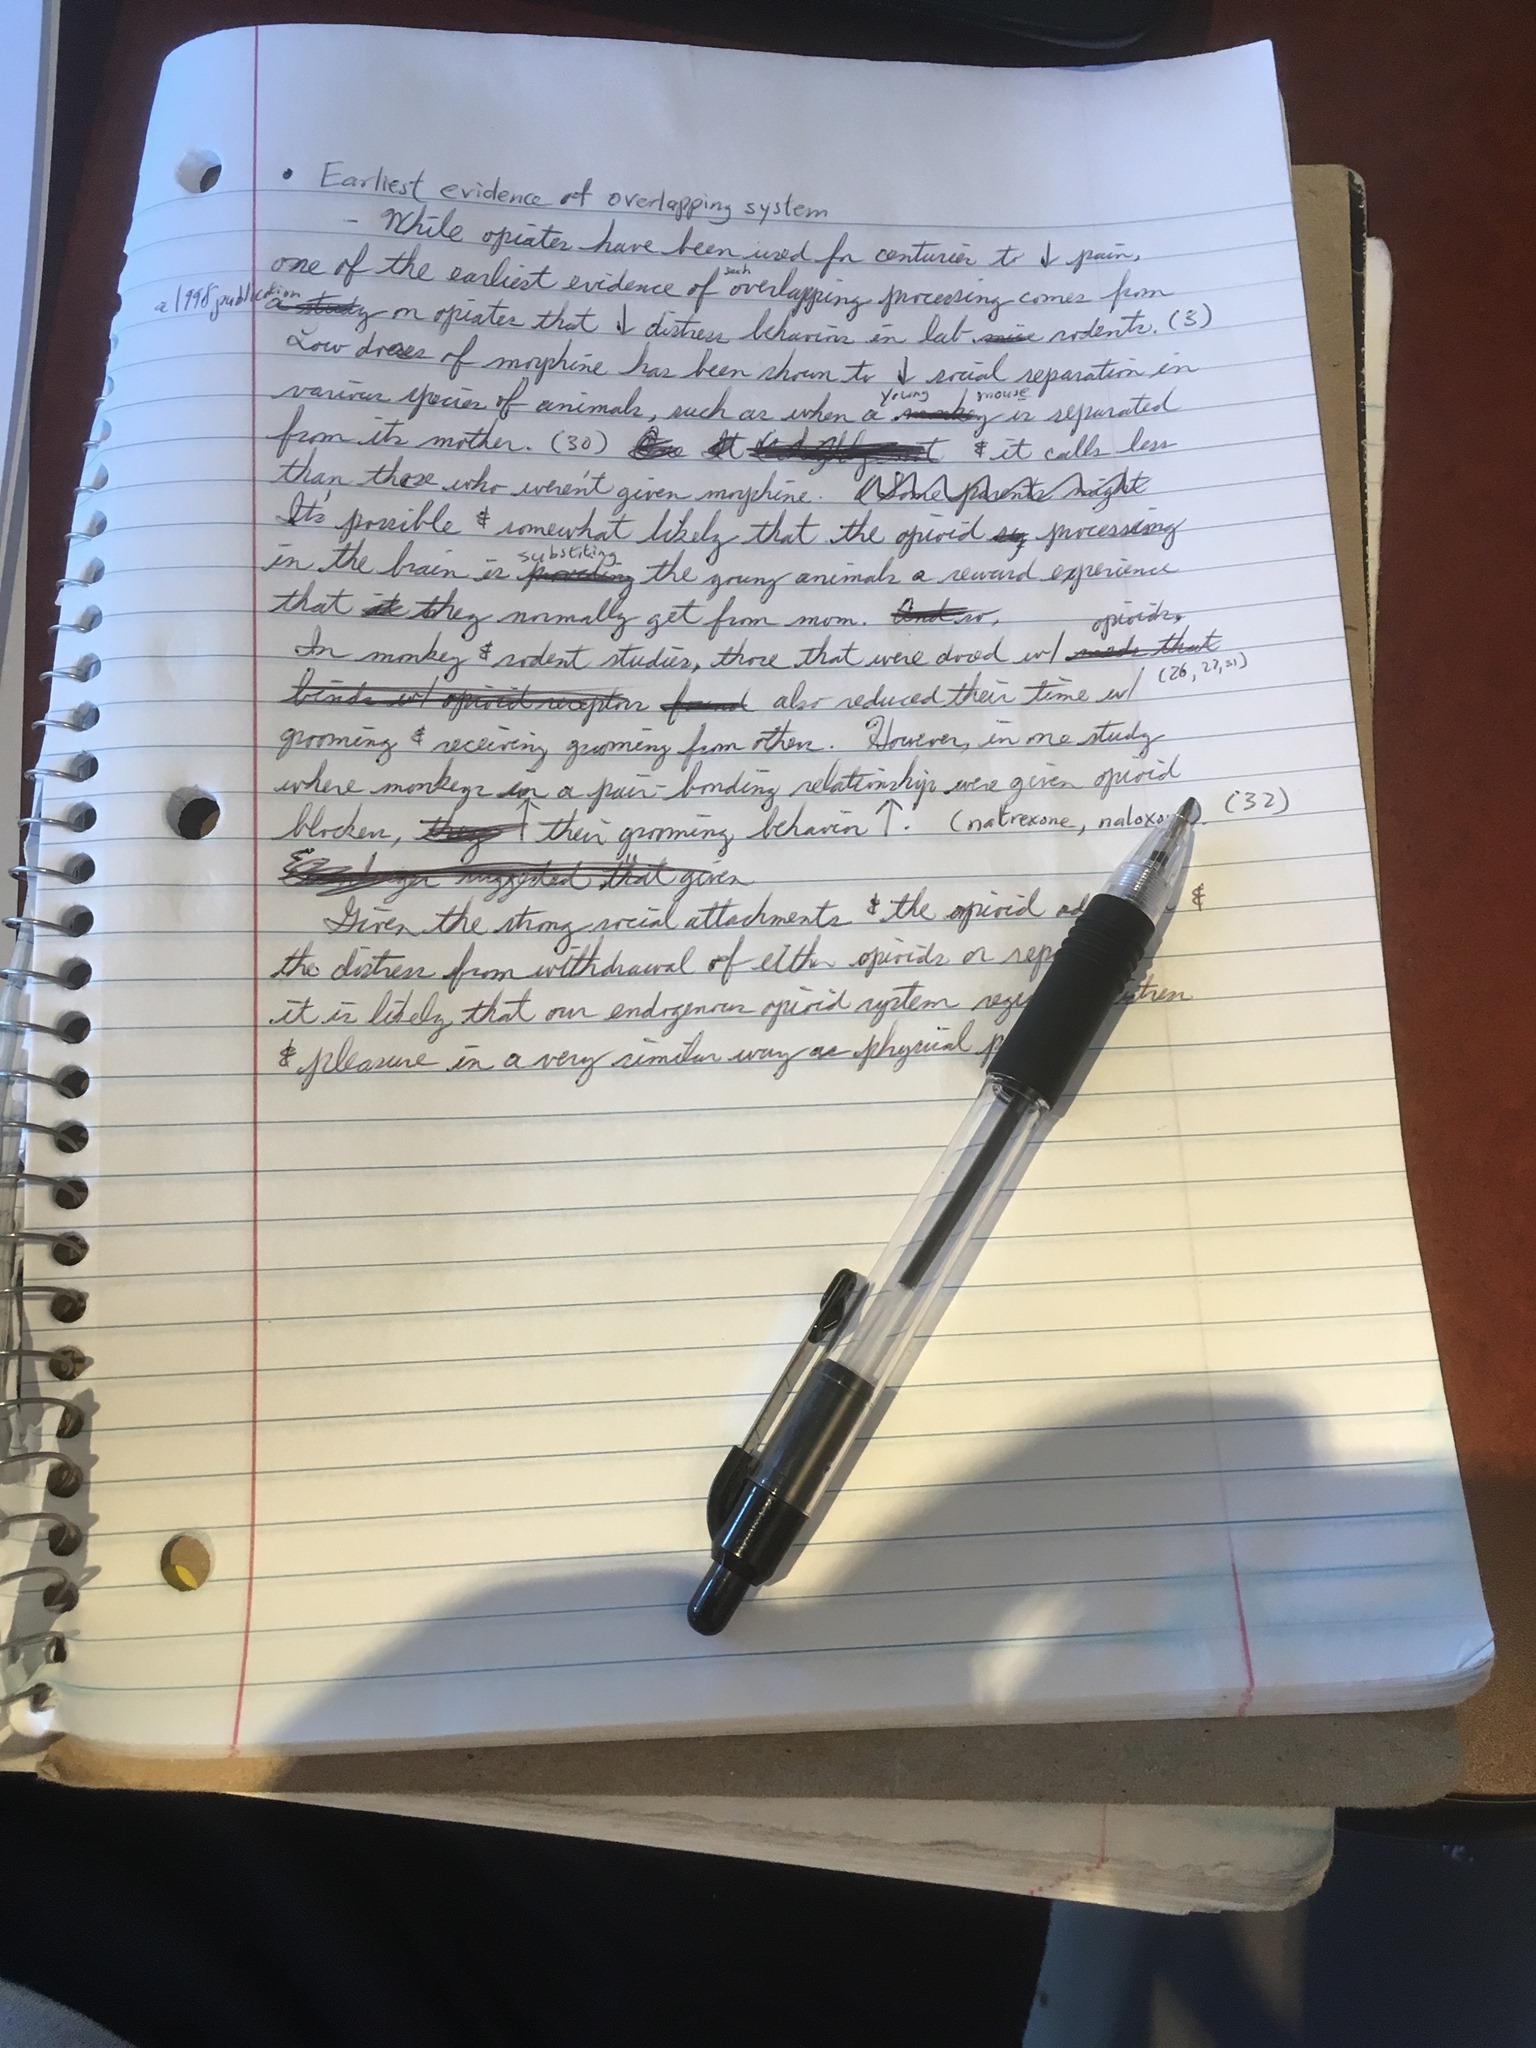 A black pen lies on a notebook with cursive writing.